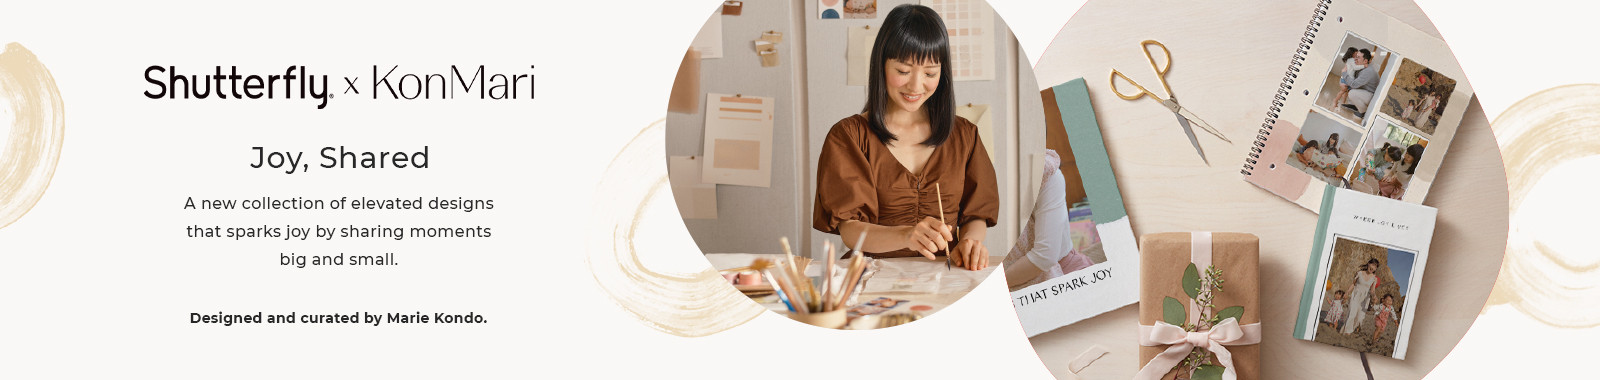 Shutterfly x KonMari.Joy, Shared. A new collection of elevated designs that sparks joy by sharing momemnts big and small. Designed and curated by Marie Kondo.